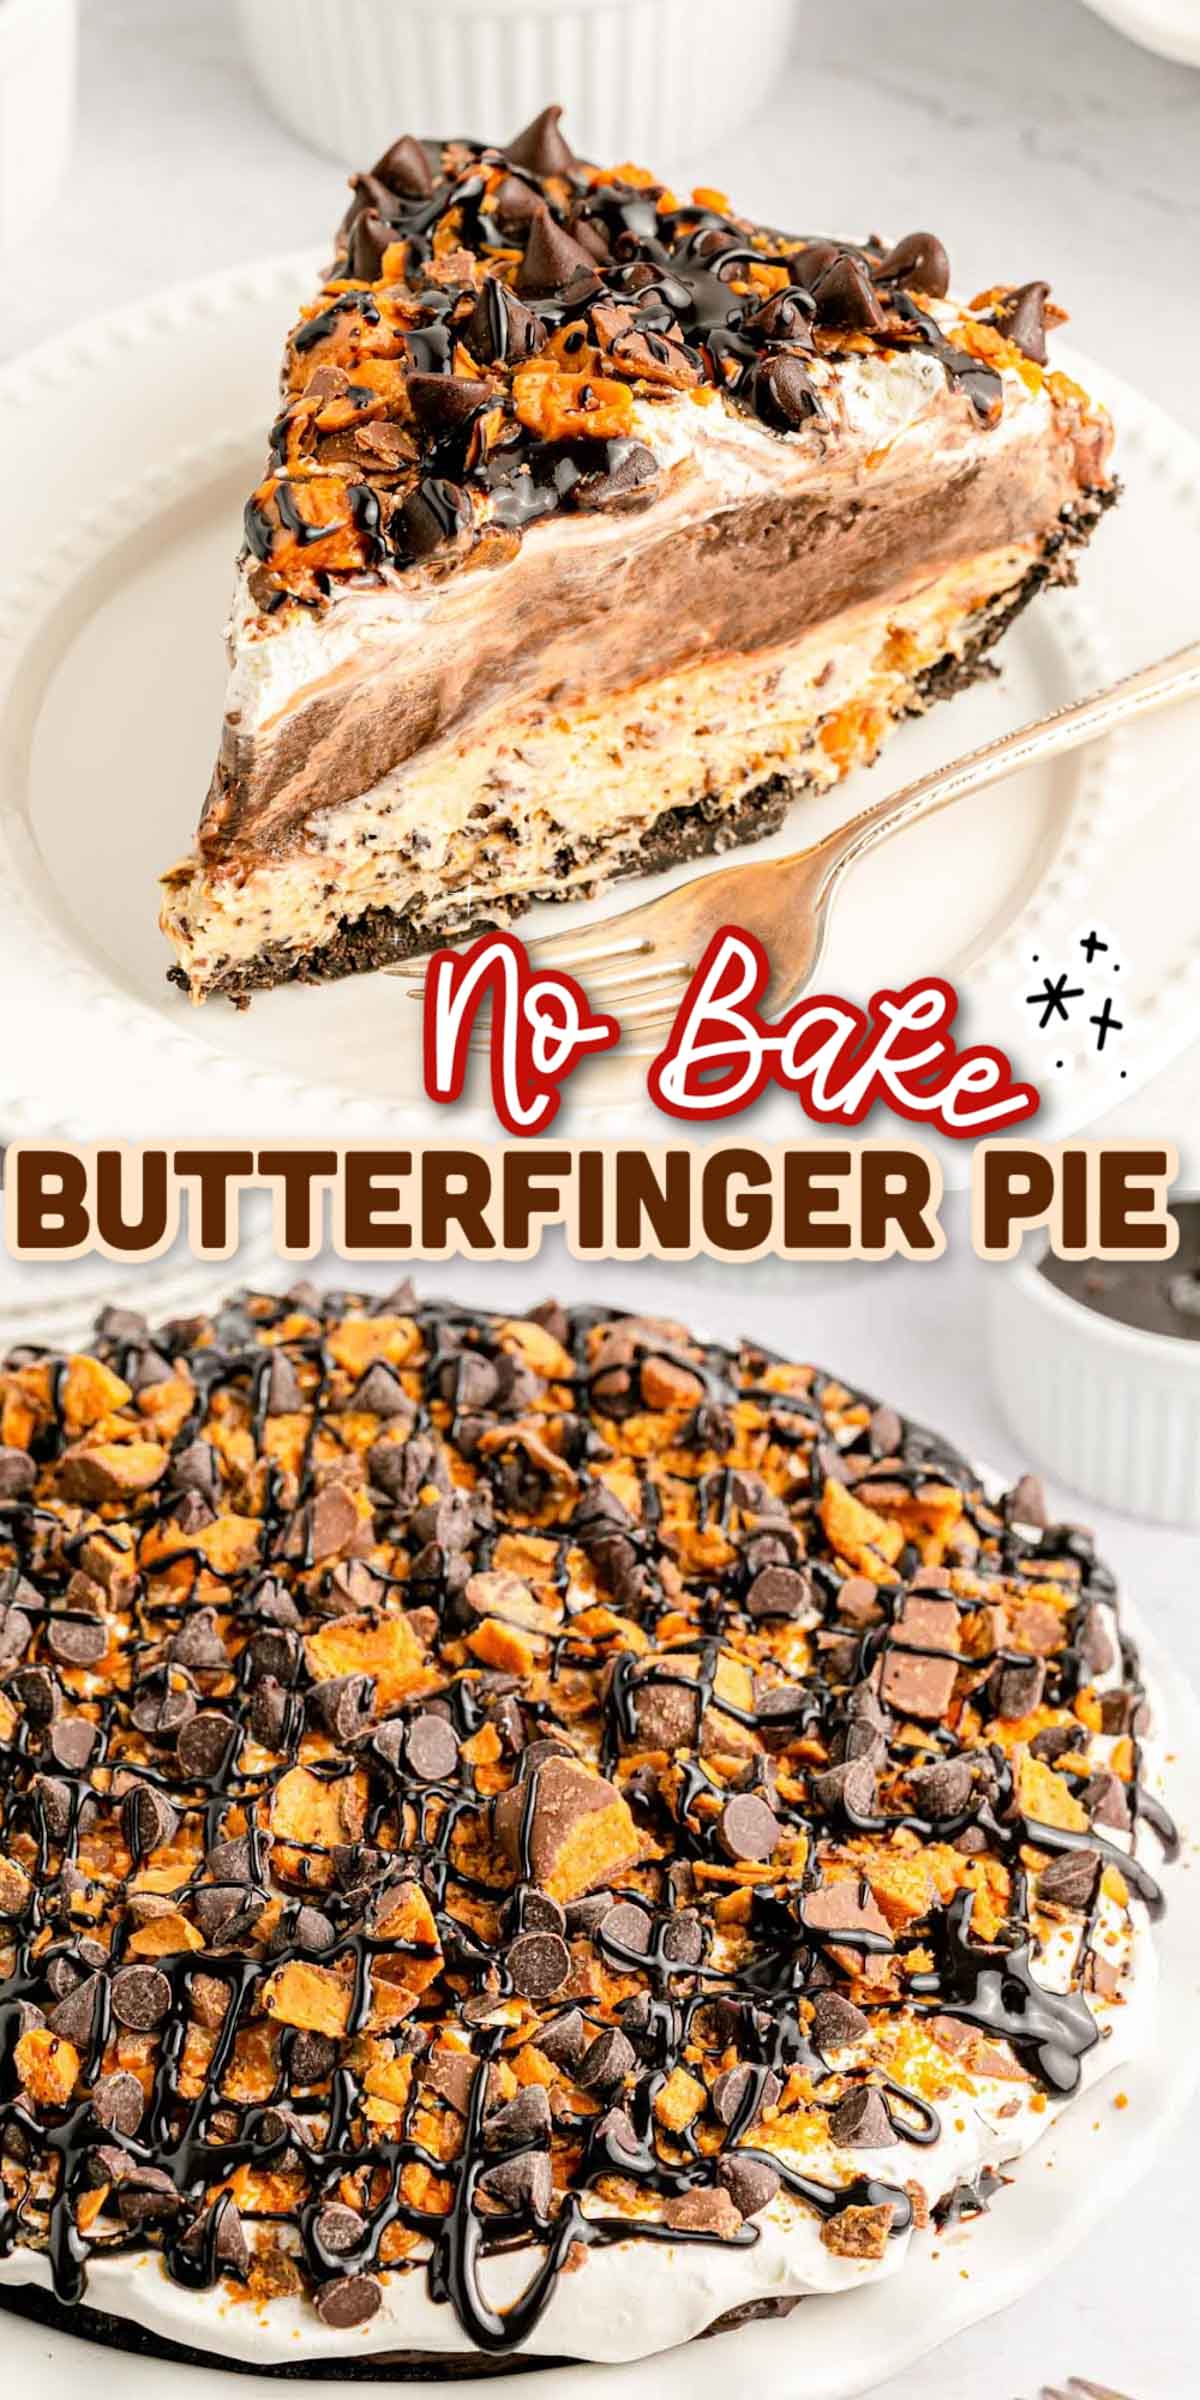 This No Bake Butterfinger Pie is a decadently layered chilled dessert that has an Oreo crust and lots of chopped Butterfinger candy bar pieces! Prep this incredibly delicious dessert in just 20 minutes! via @sugarandsoulco